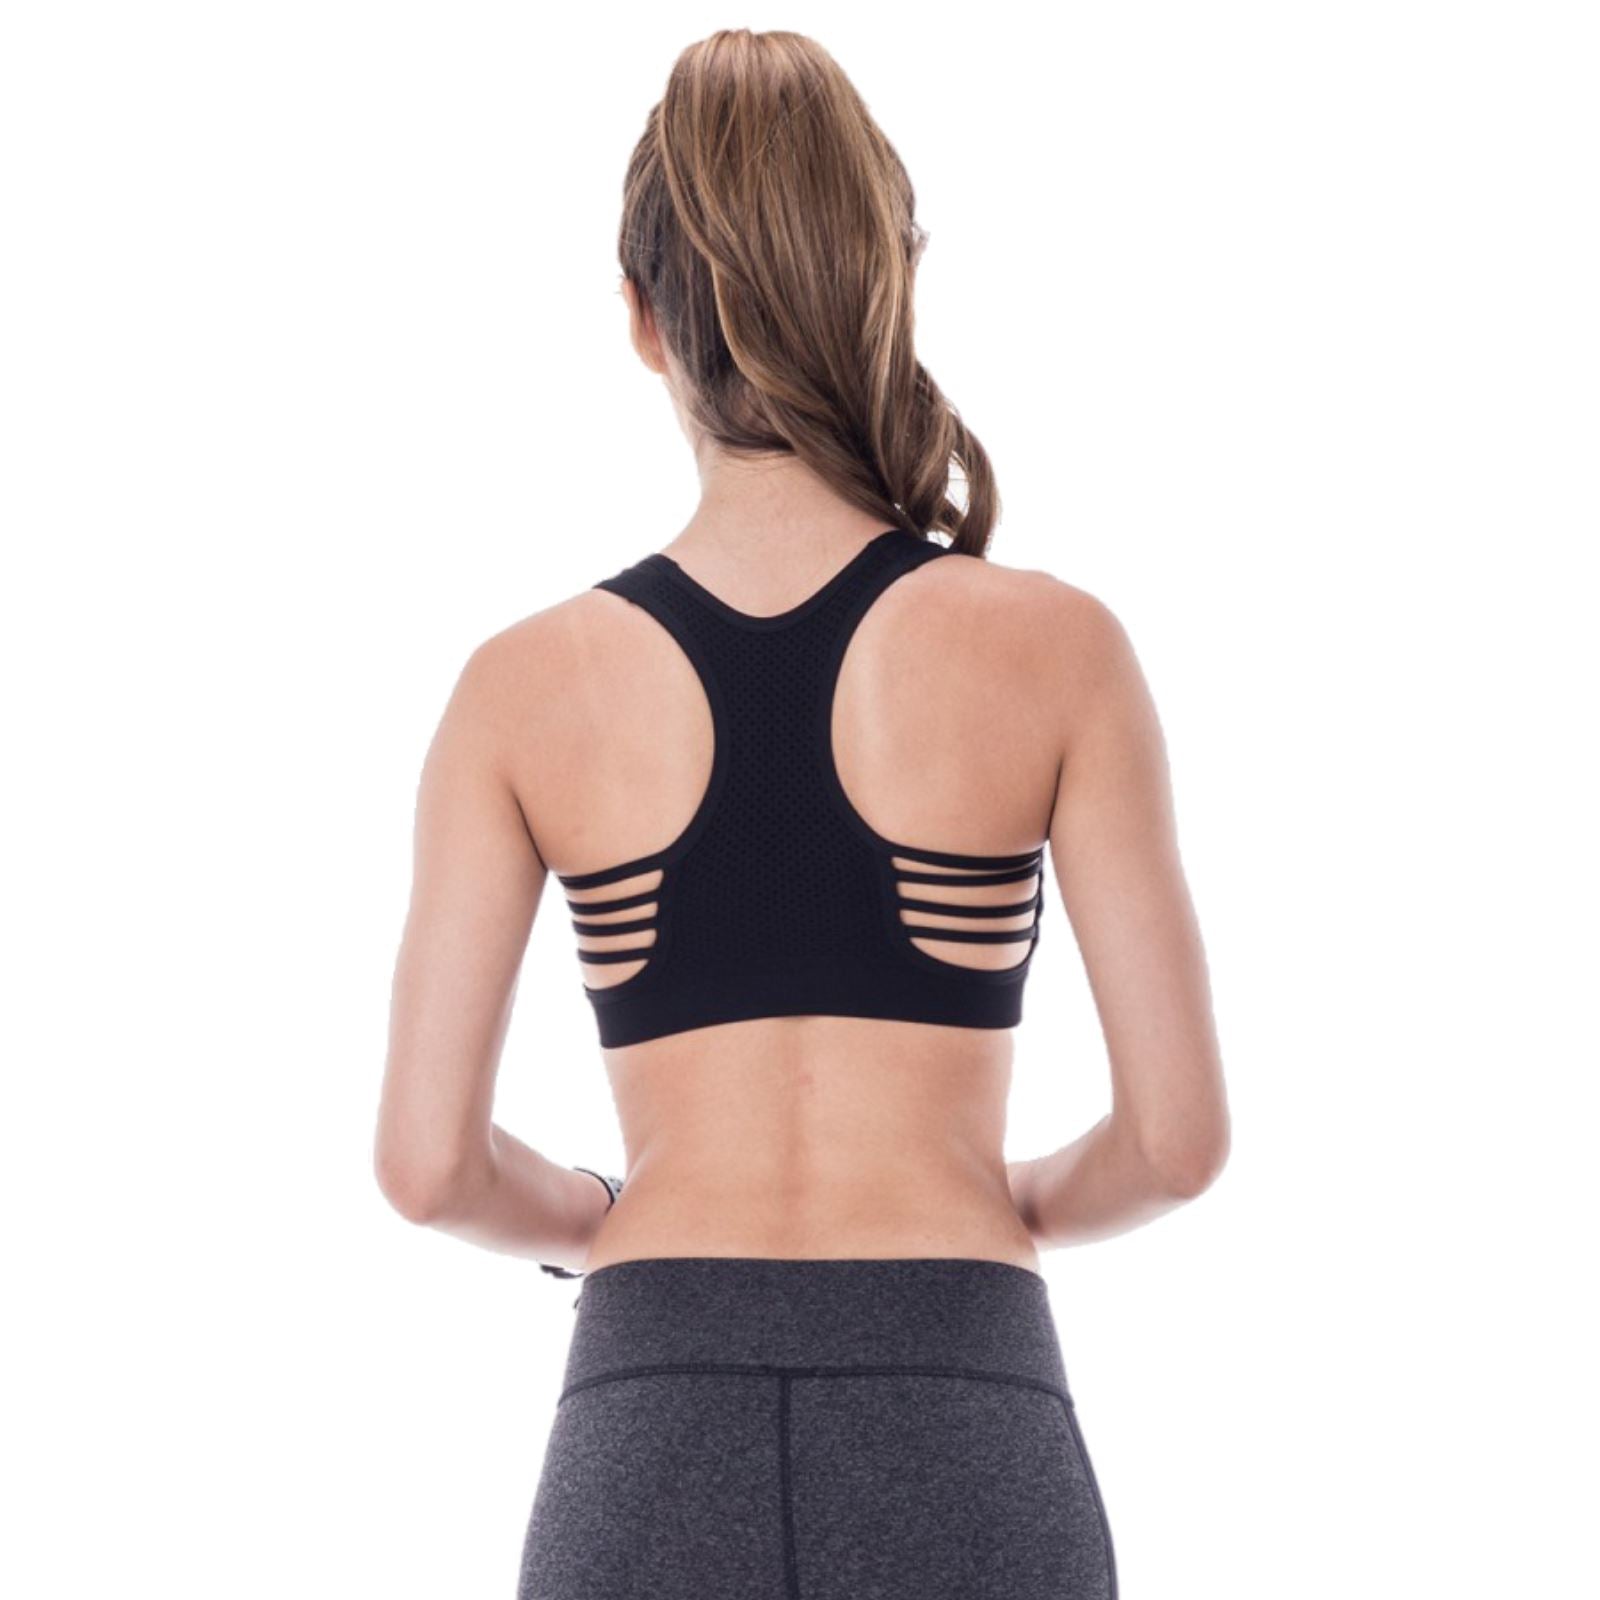 DOUBLE LAYERED MESH BACK SPORTS BRA WITH SUPPORT Dancewear Kurve Black One Size (Youth - Medium Adult) 